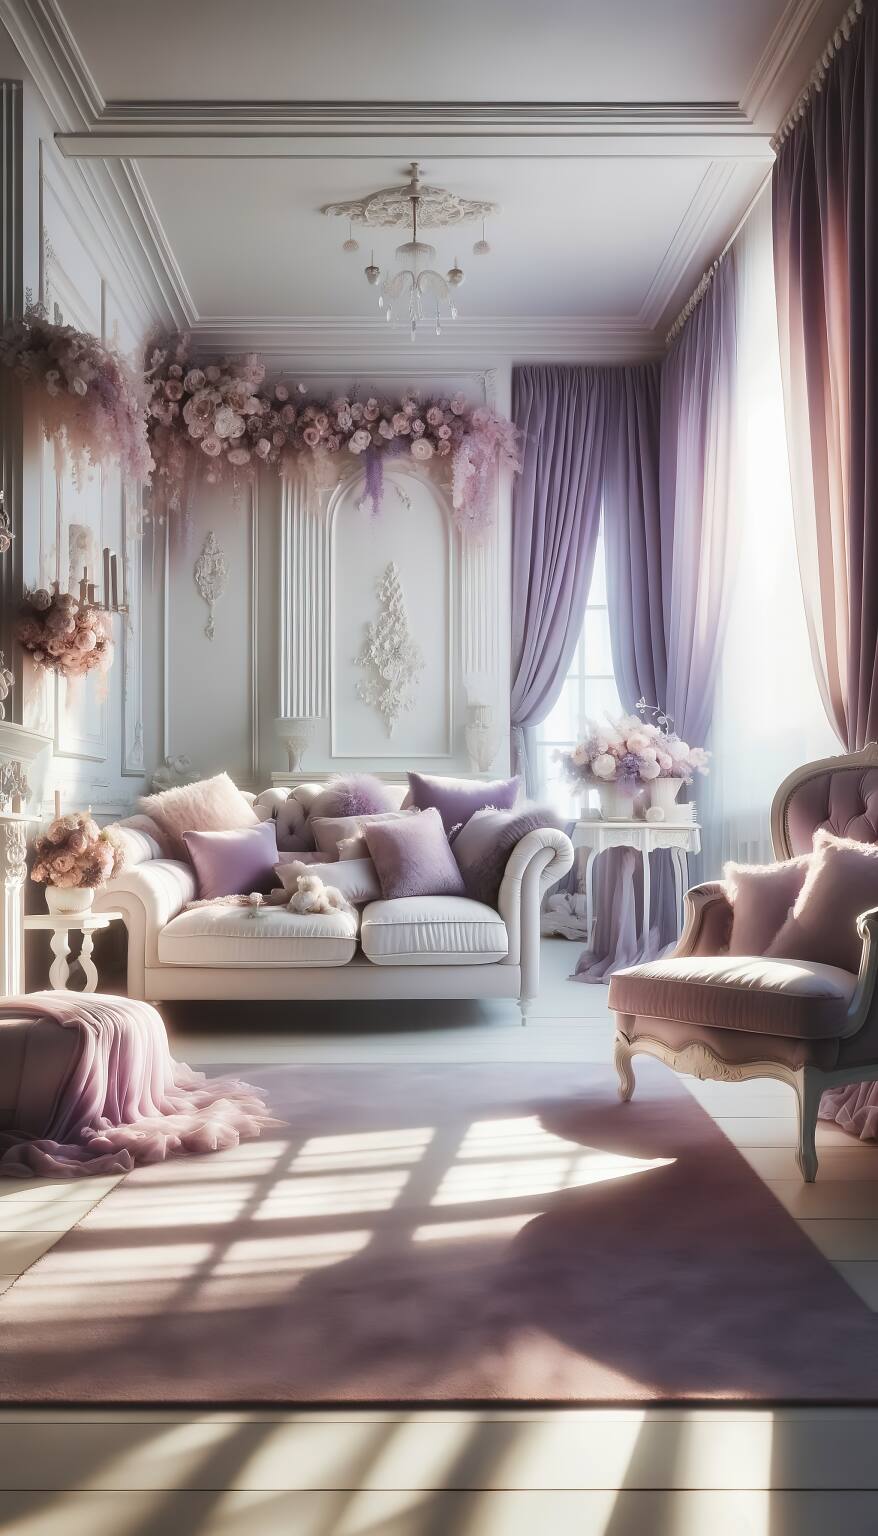 A Serene And Romantic Living Room In Shades Of Lavender And White, Featuring A Cozy Sofa, Fluffy Armchairs, And An Elegant Coffee Table, Embodying An Atmosphere Of Tranquil Bliss.